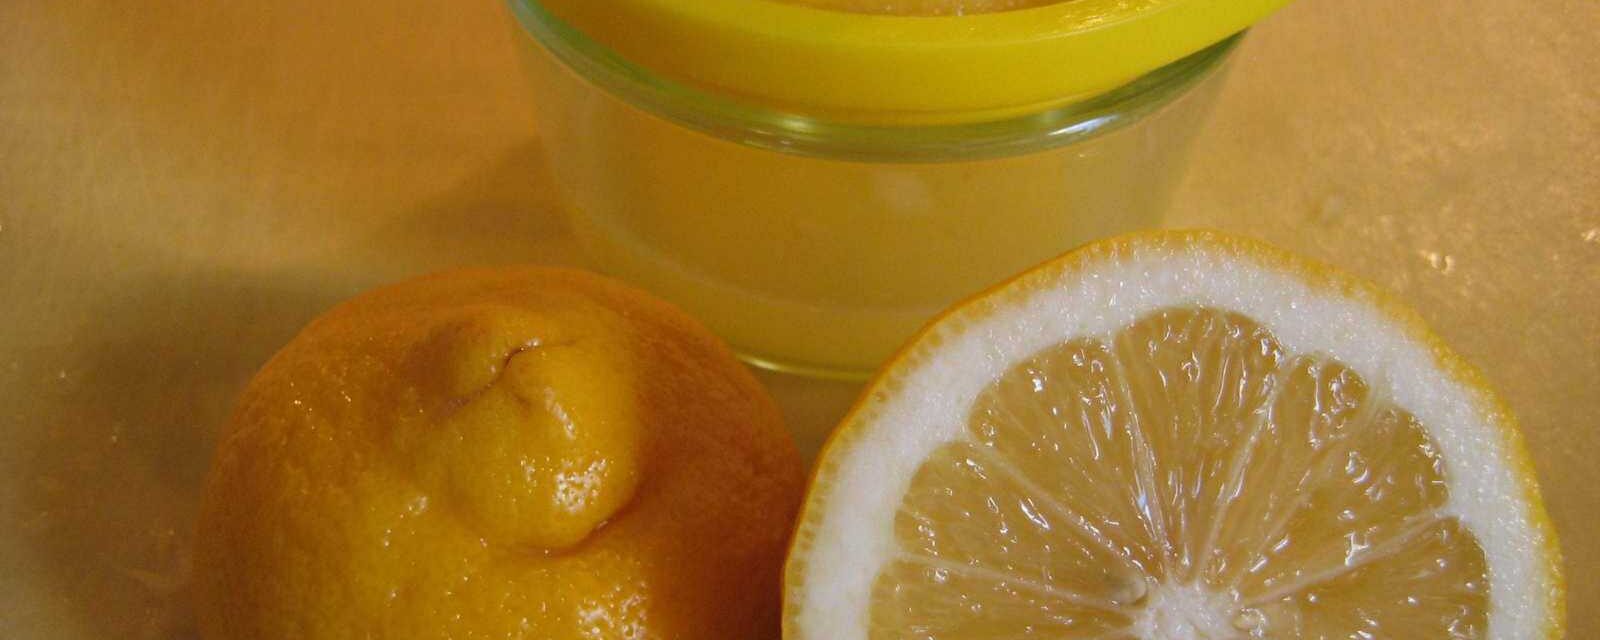 Lemon Water: What’s True (and not so true)